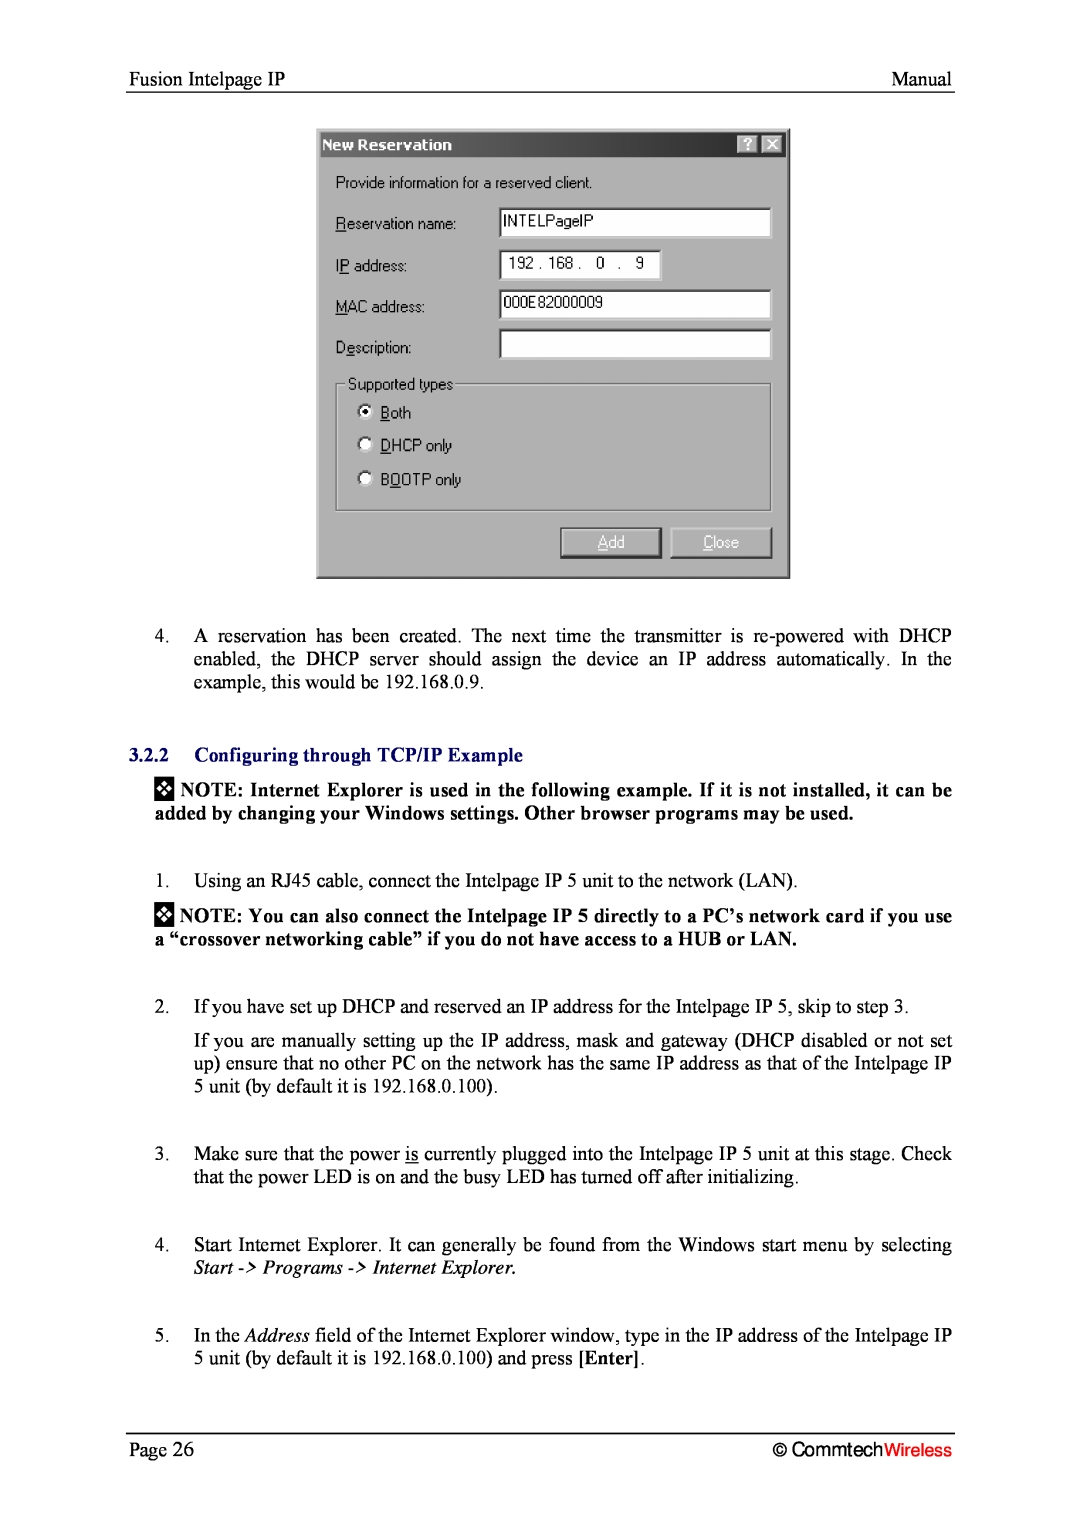 Fusion 2.1, INTELPage IP 5 manual 3.2.2Configuring through TCP/IP Example, CommtechWireless 